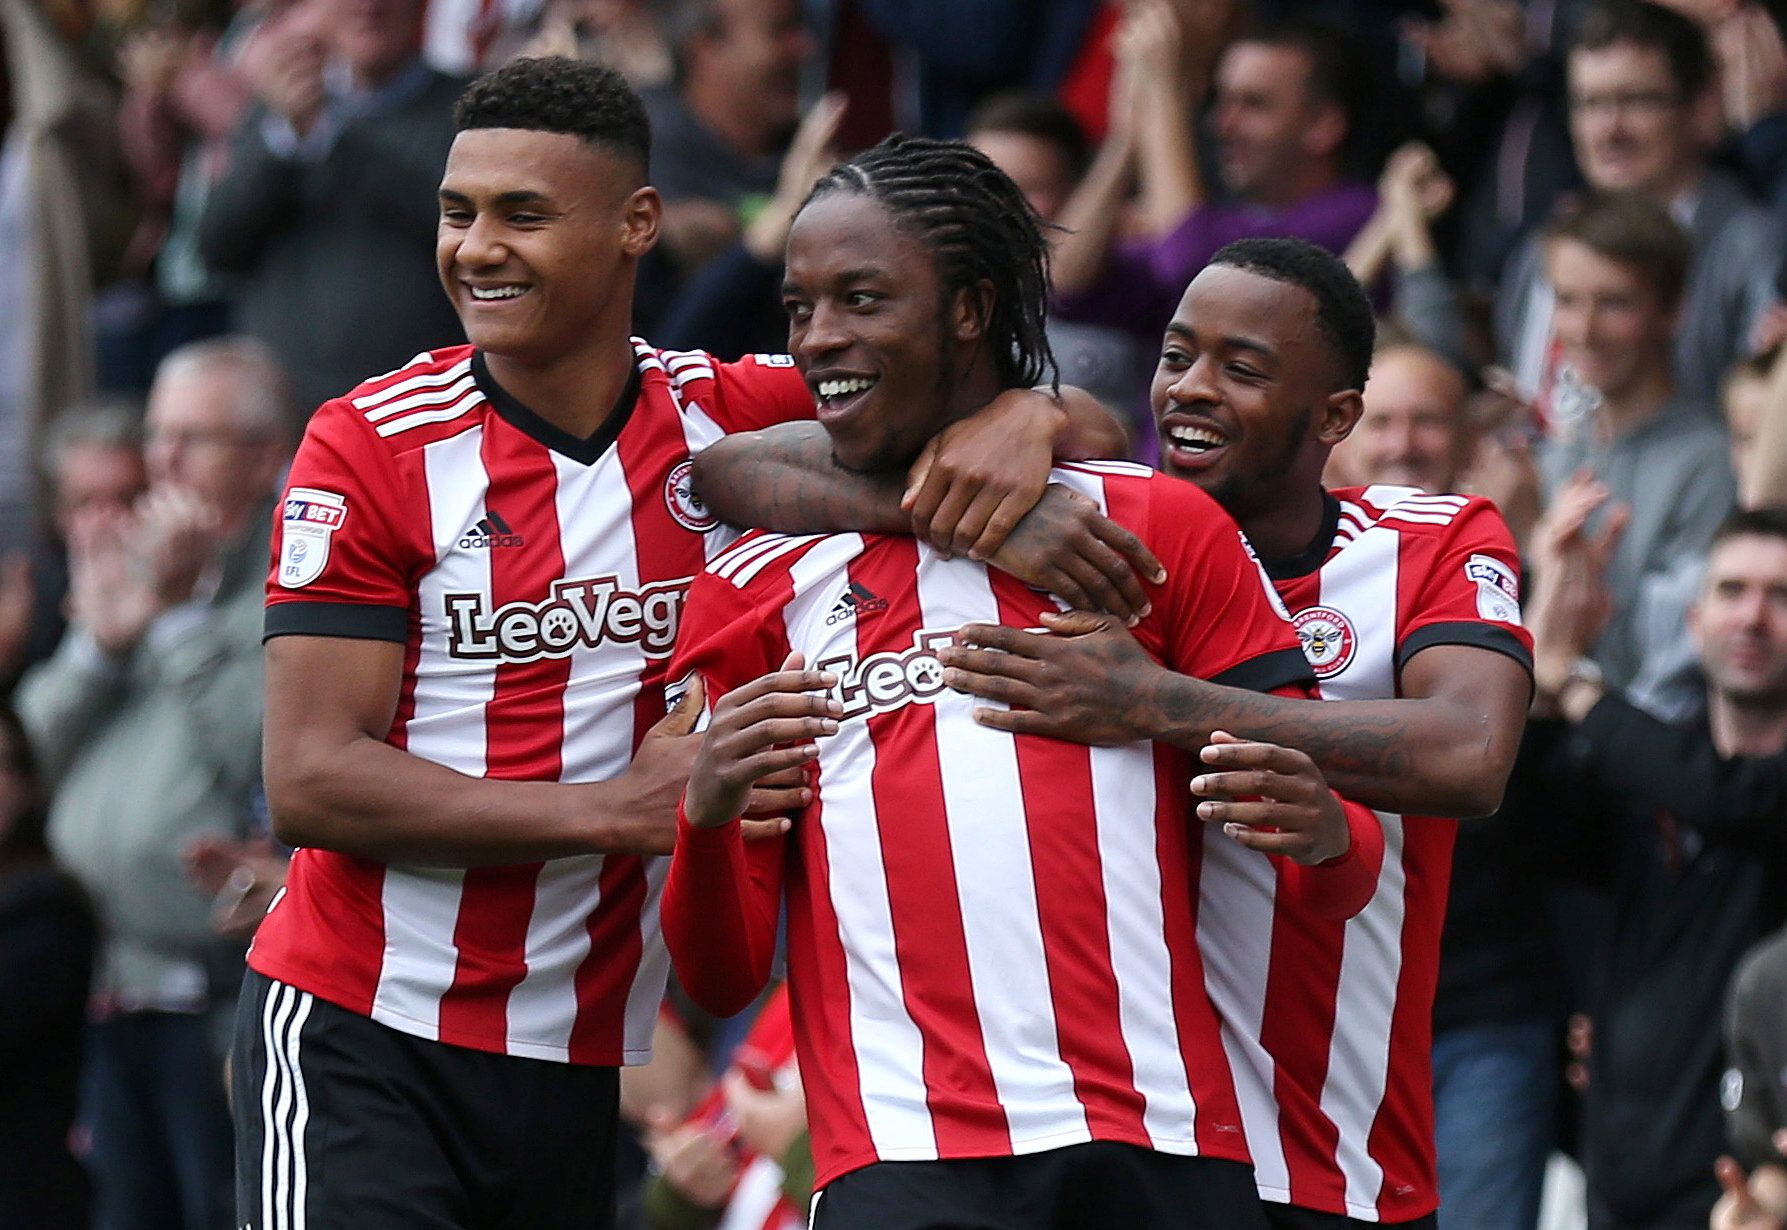 Soccer Football - Championship - Brentford vs Millwall - Griffin Park, Brentford, Britain - October 14, 2017  Brentford's Romaine Sawyers celebrates scoring their first goal with team mates  Action Images/Tom Jacobs  EDITORIAL USE ONLY. No use with unauthorized audio, video, data, fixture lists, club/league logos or 